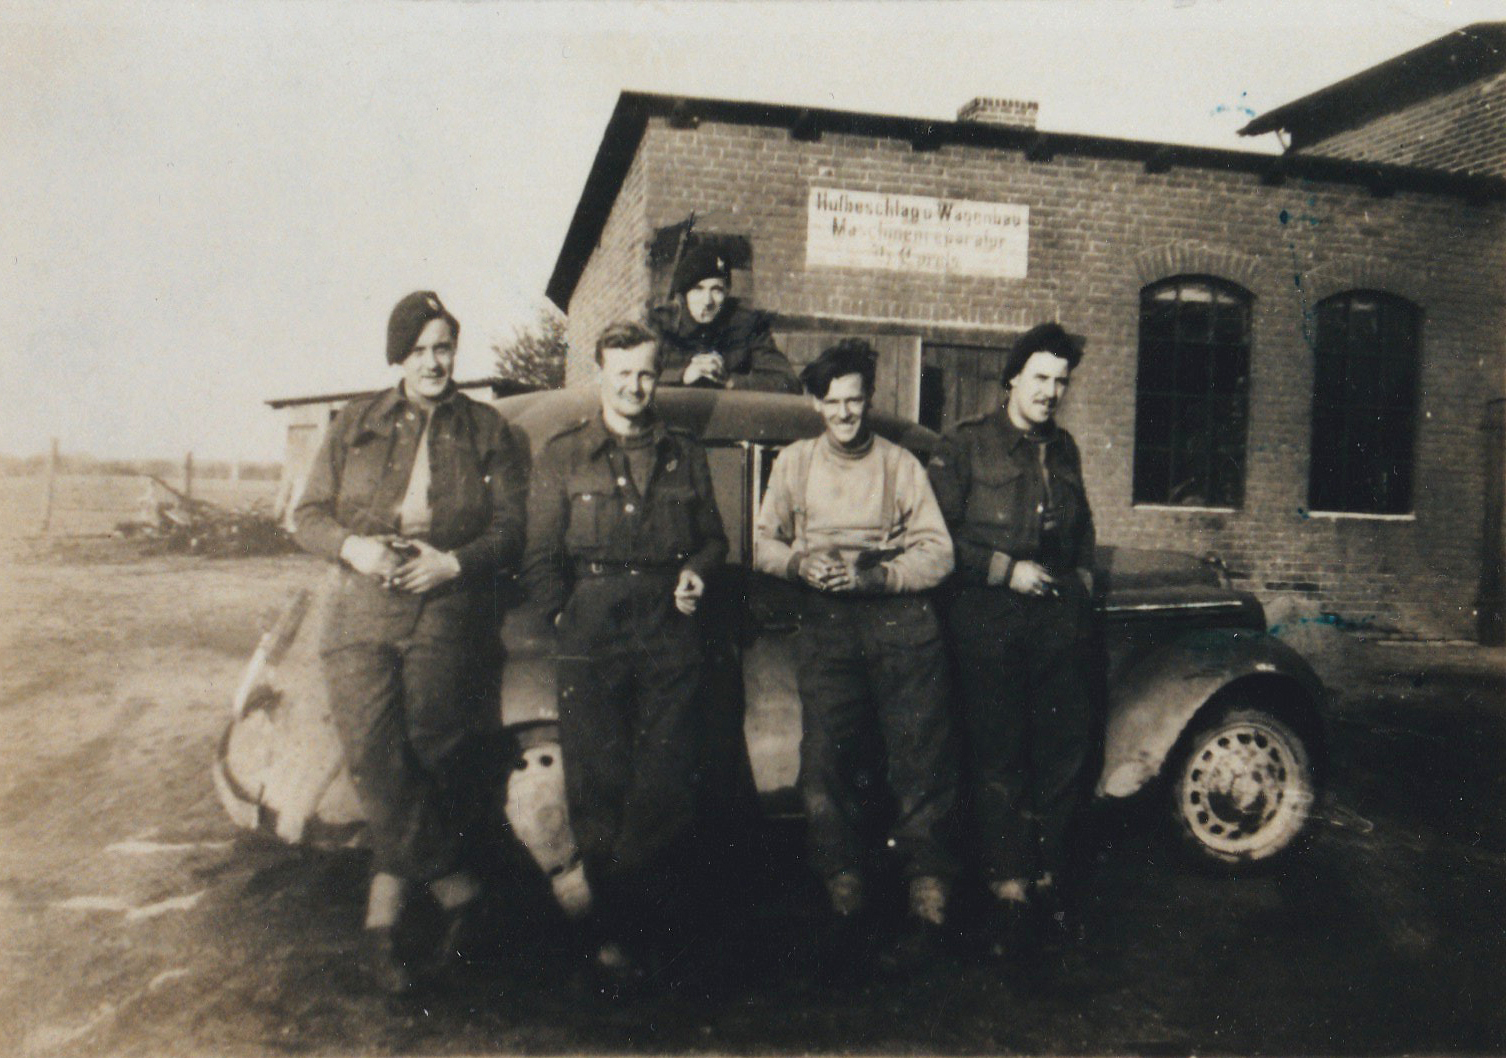 Four of 45RM Cdo. in Germany 1945